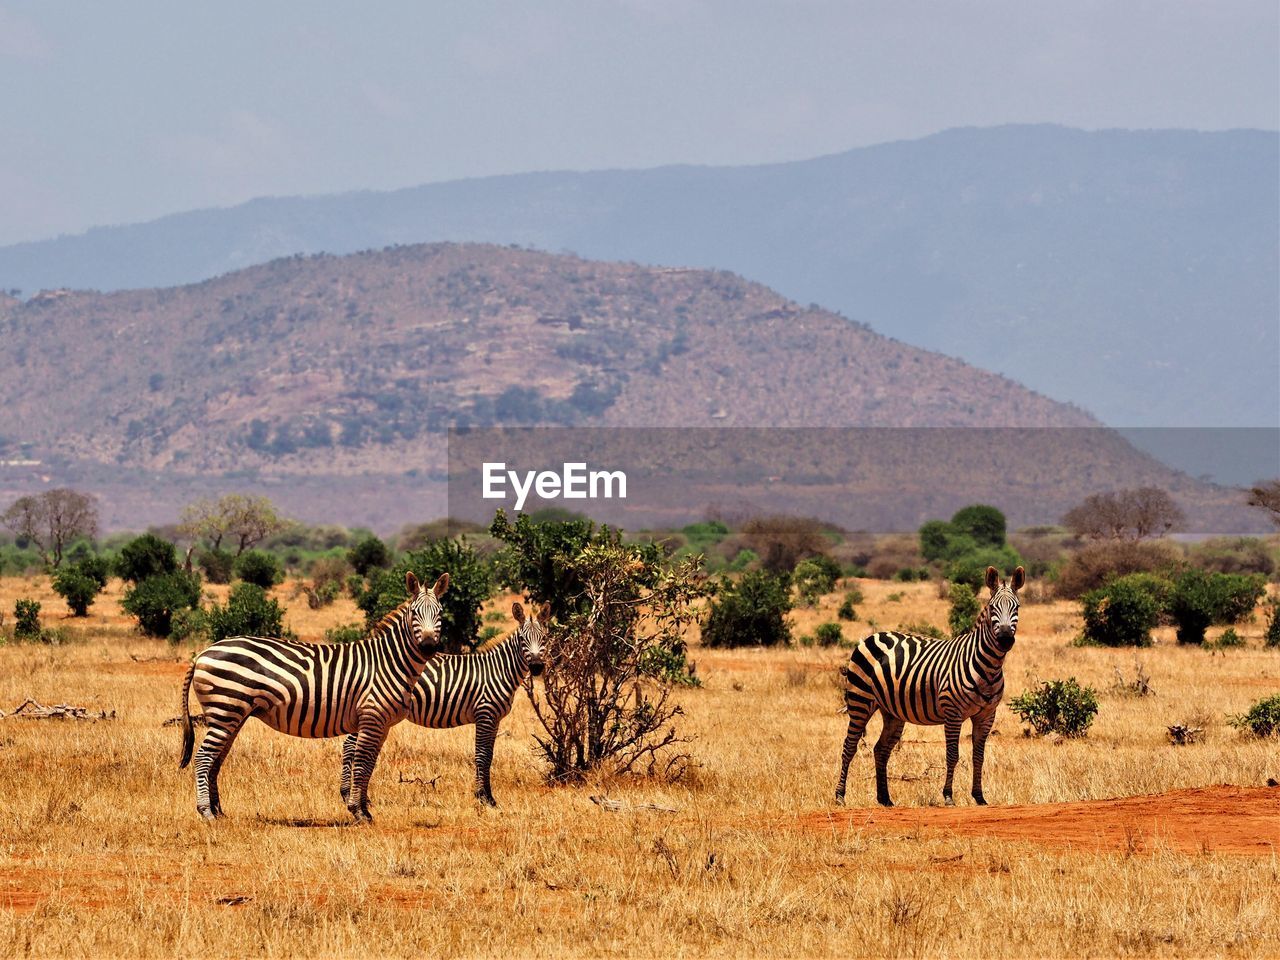 VIEW OF ZEBRA ON FIELD AGAINST MOUNTAINS